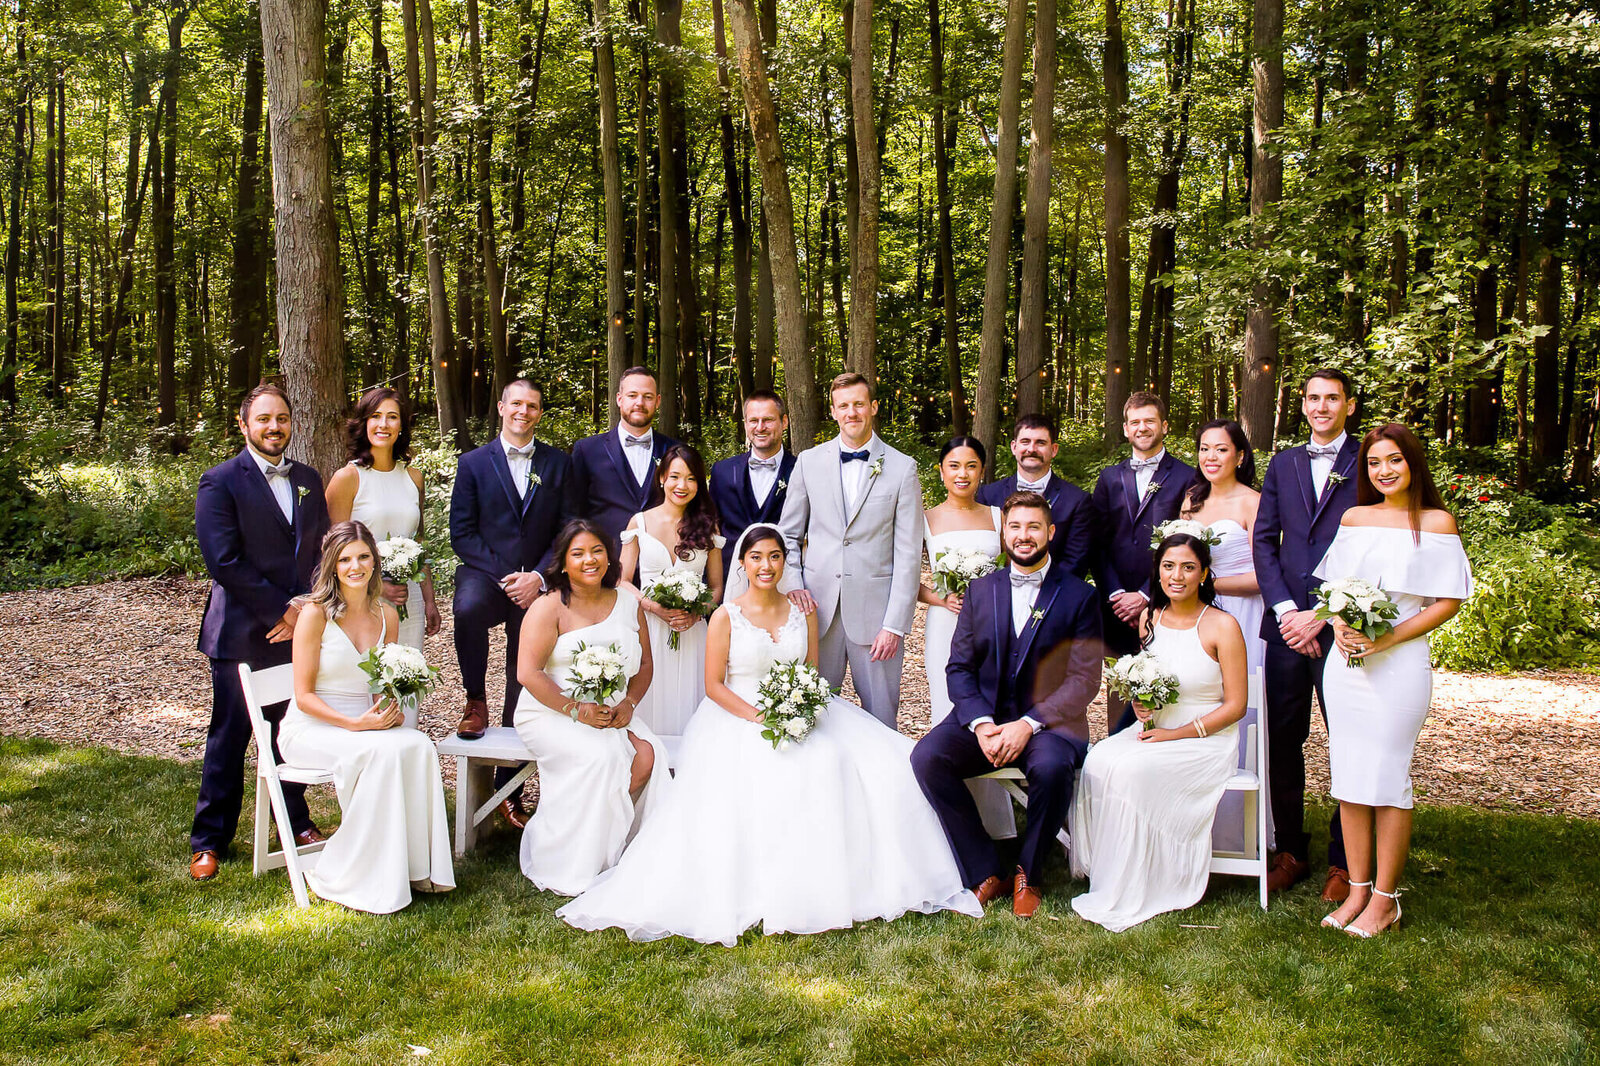 Wedding party portrait with bridesmaids and groomsmen.